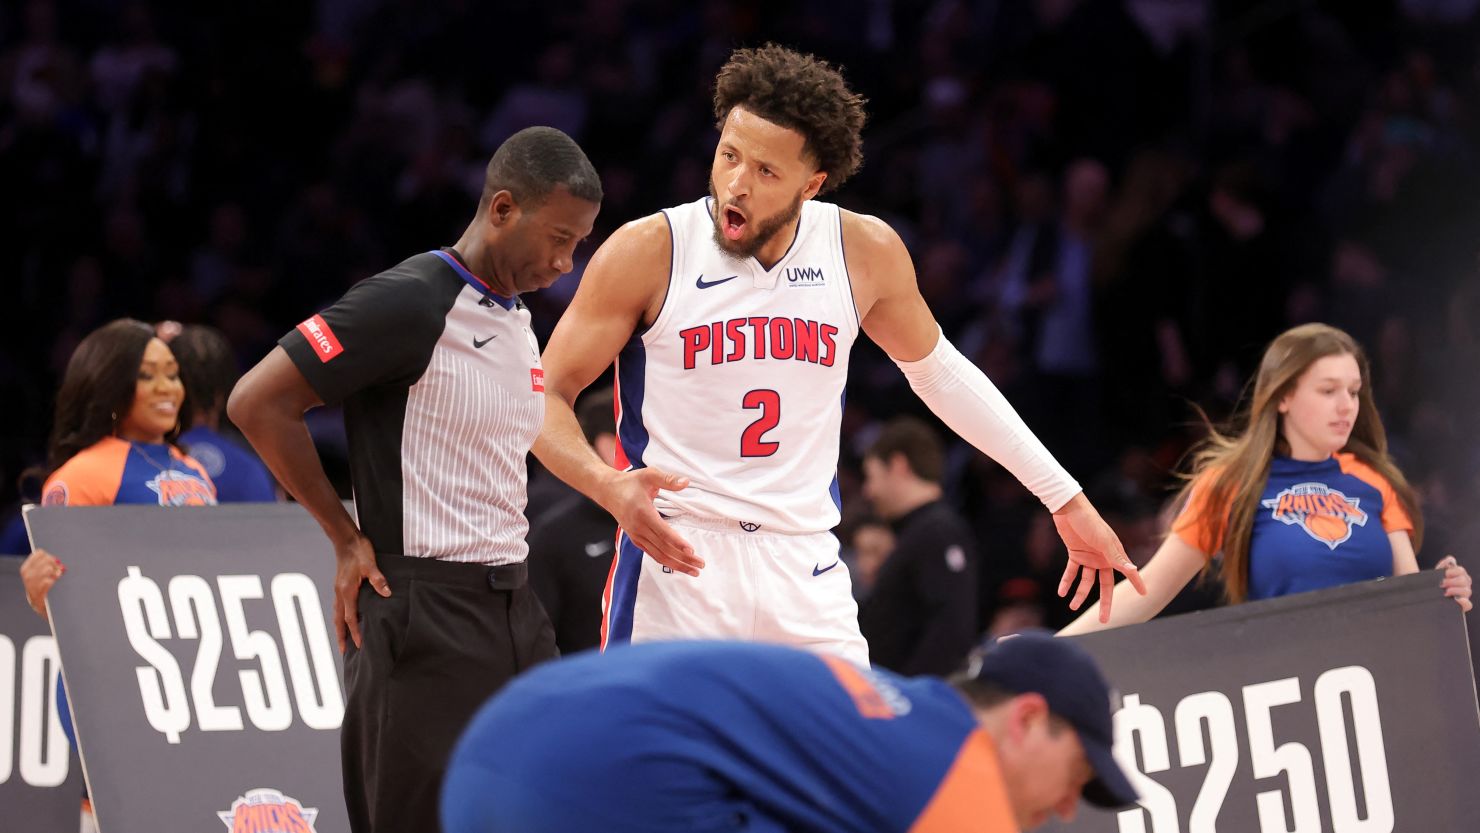 The Pistons were fuming with a late no-call that cost them the game.